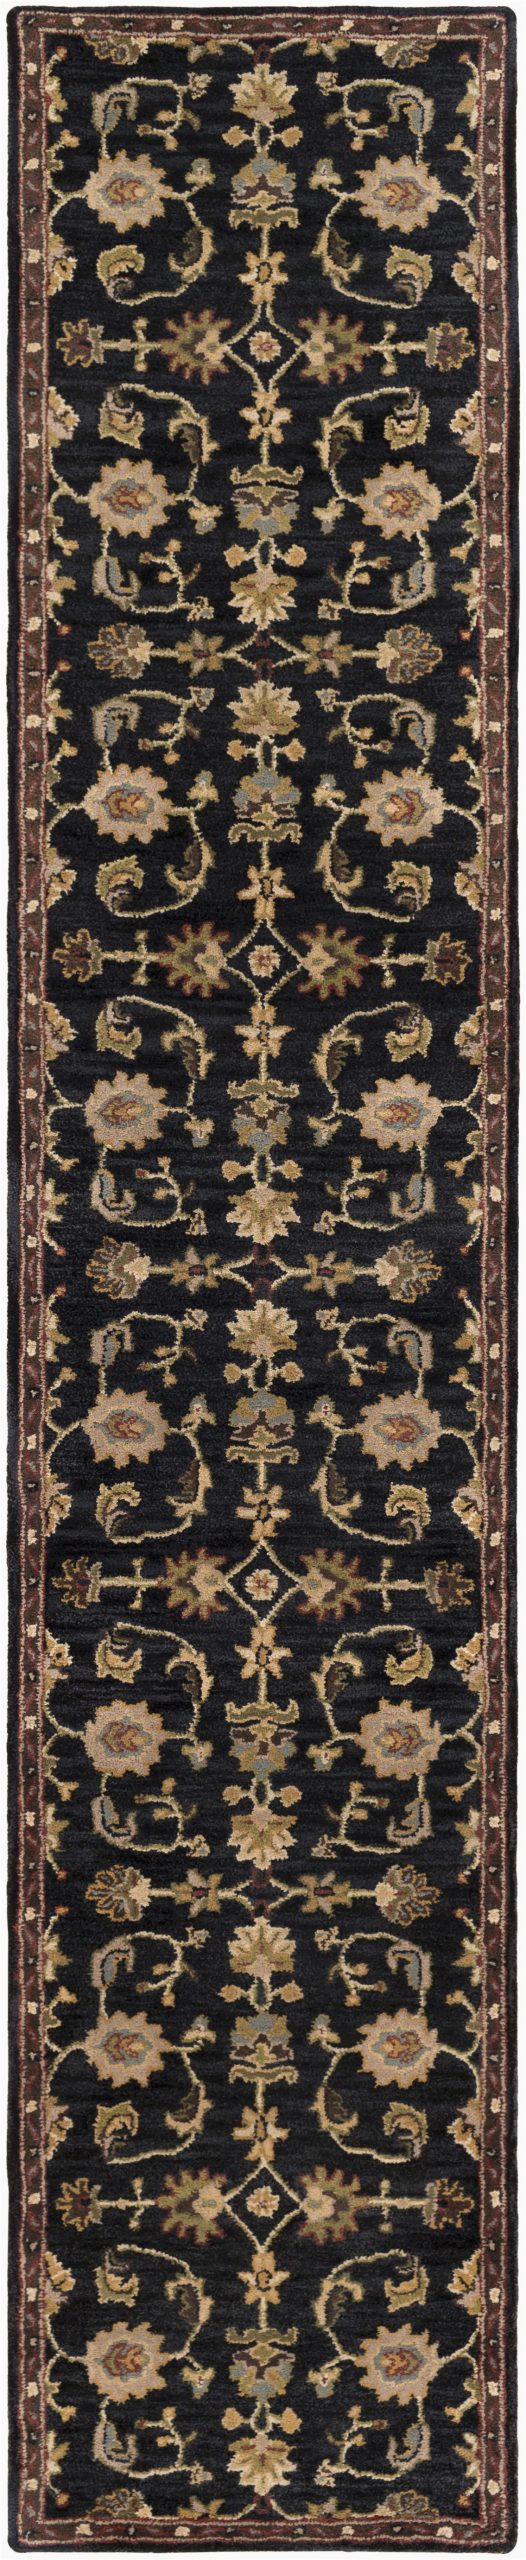 Area Rugs for Sale On Ebay Surya Traditional 4 X 6 Black area Rug Awmd1000 46